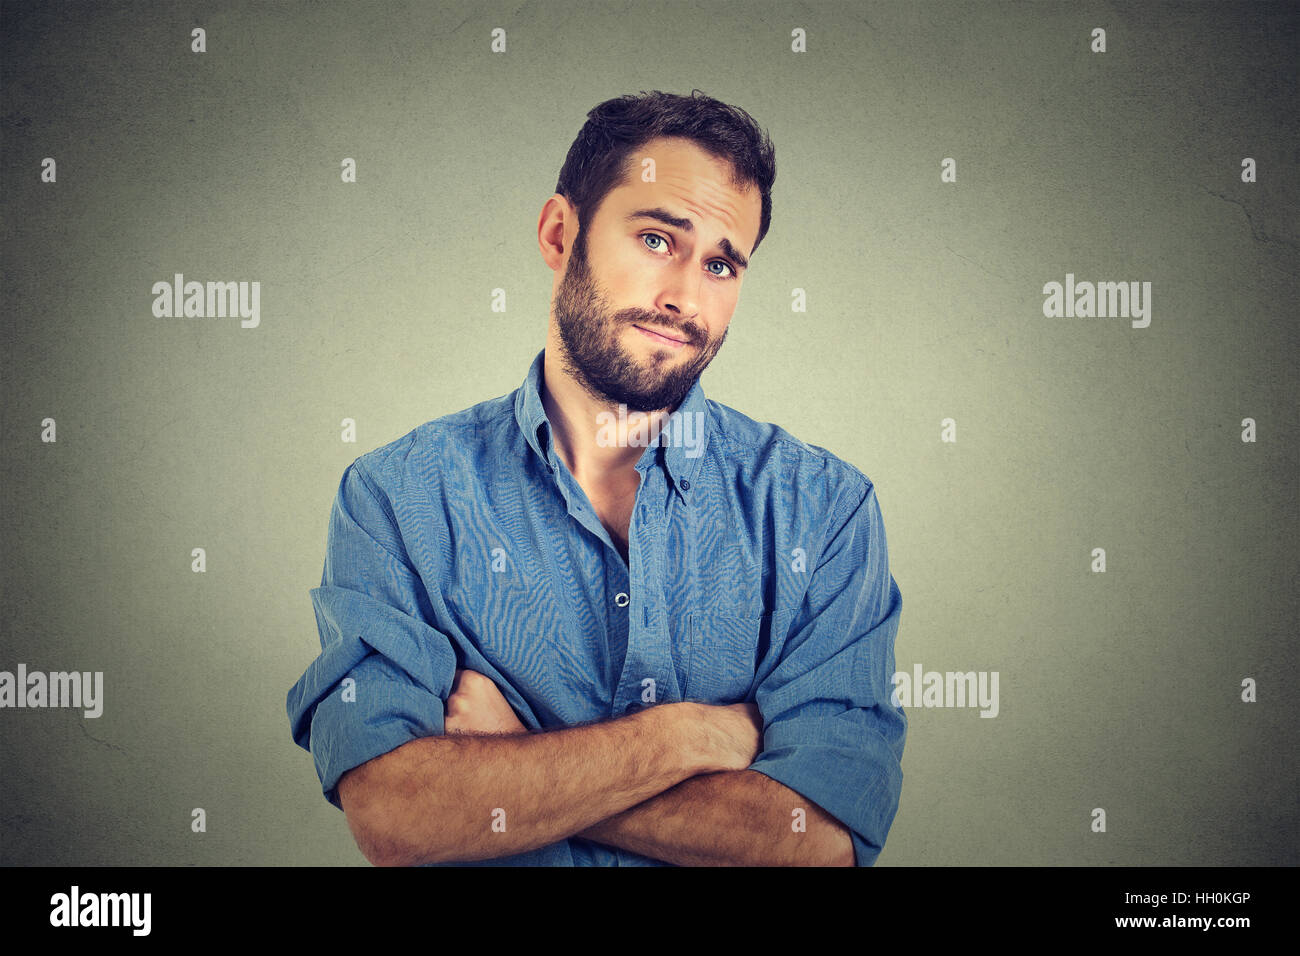 skeptical man looking suspicious, some disgust on face mixed with disapproval isolated gray background. Negative human emotion Stock Photo